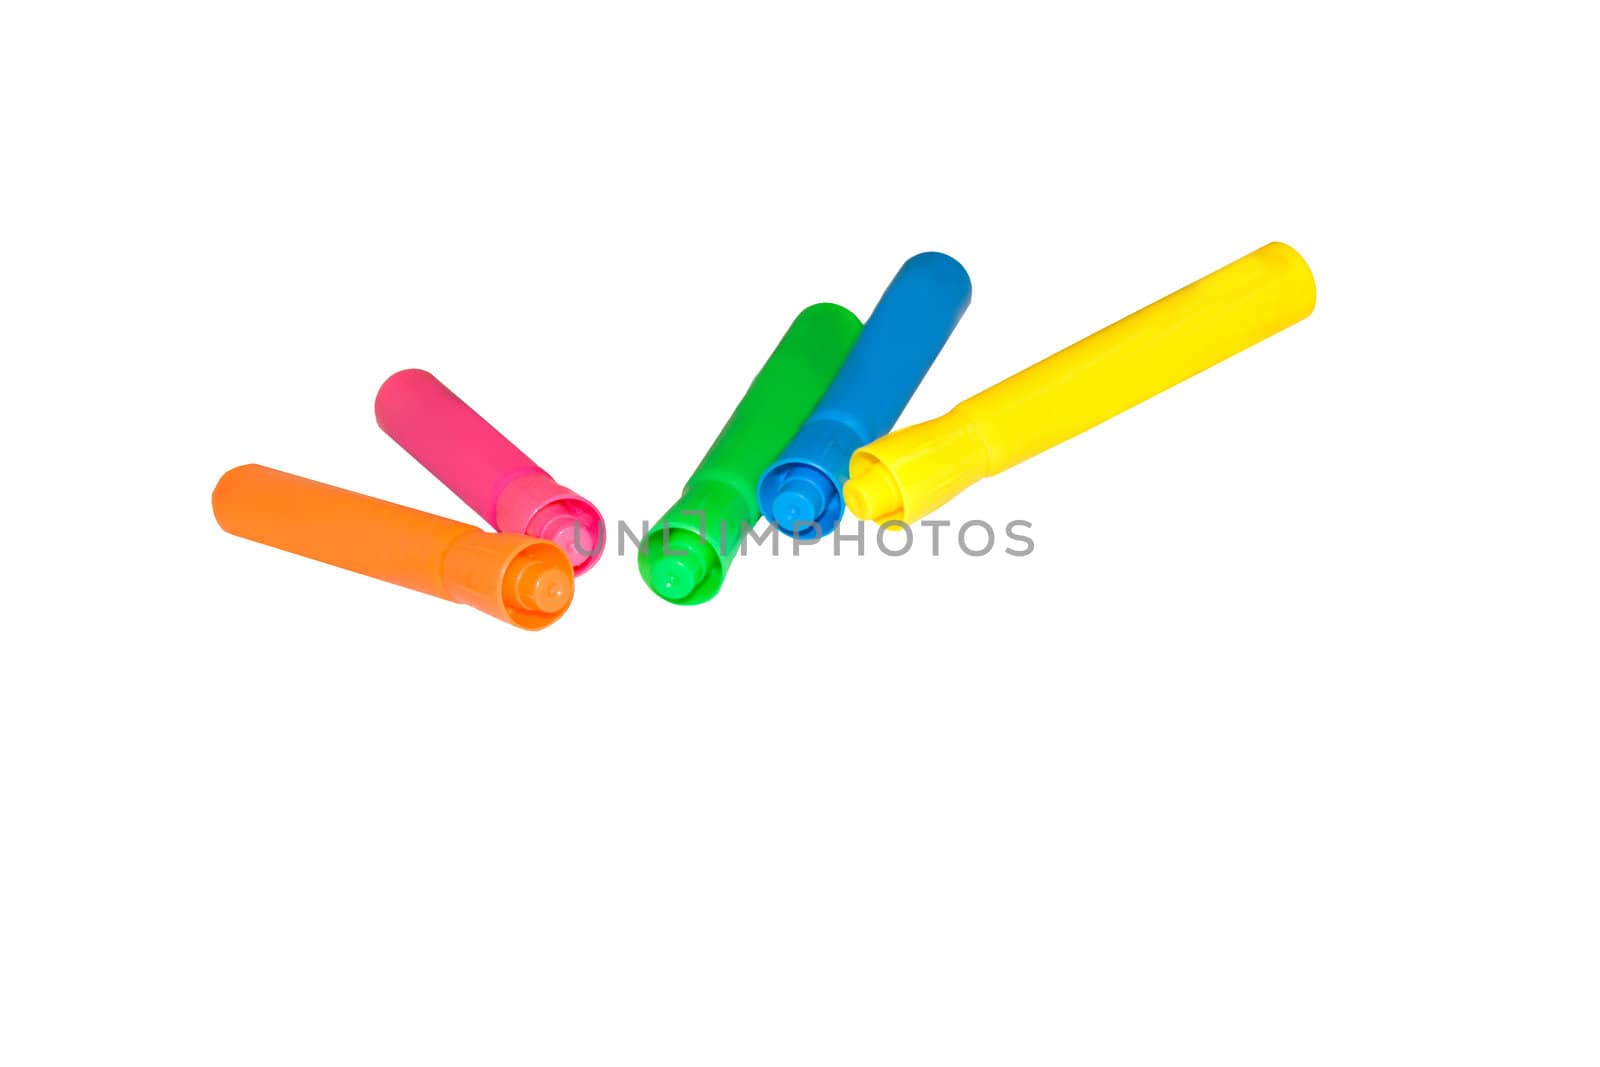 Highlighters v1 are isolated on a white background with plenty of copy space.